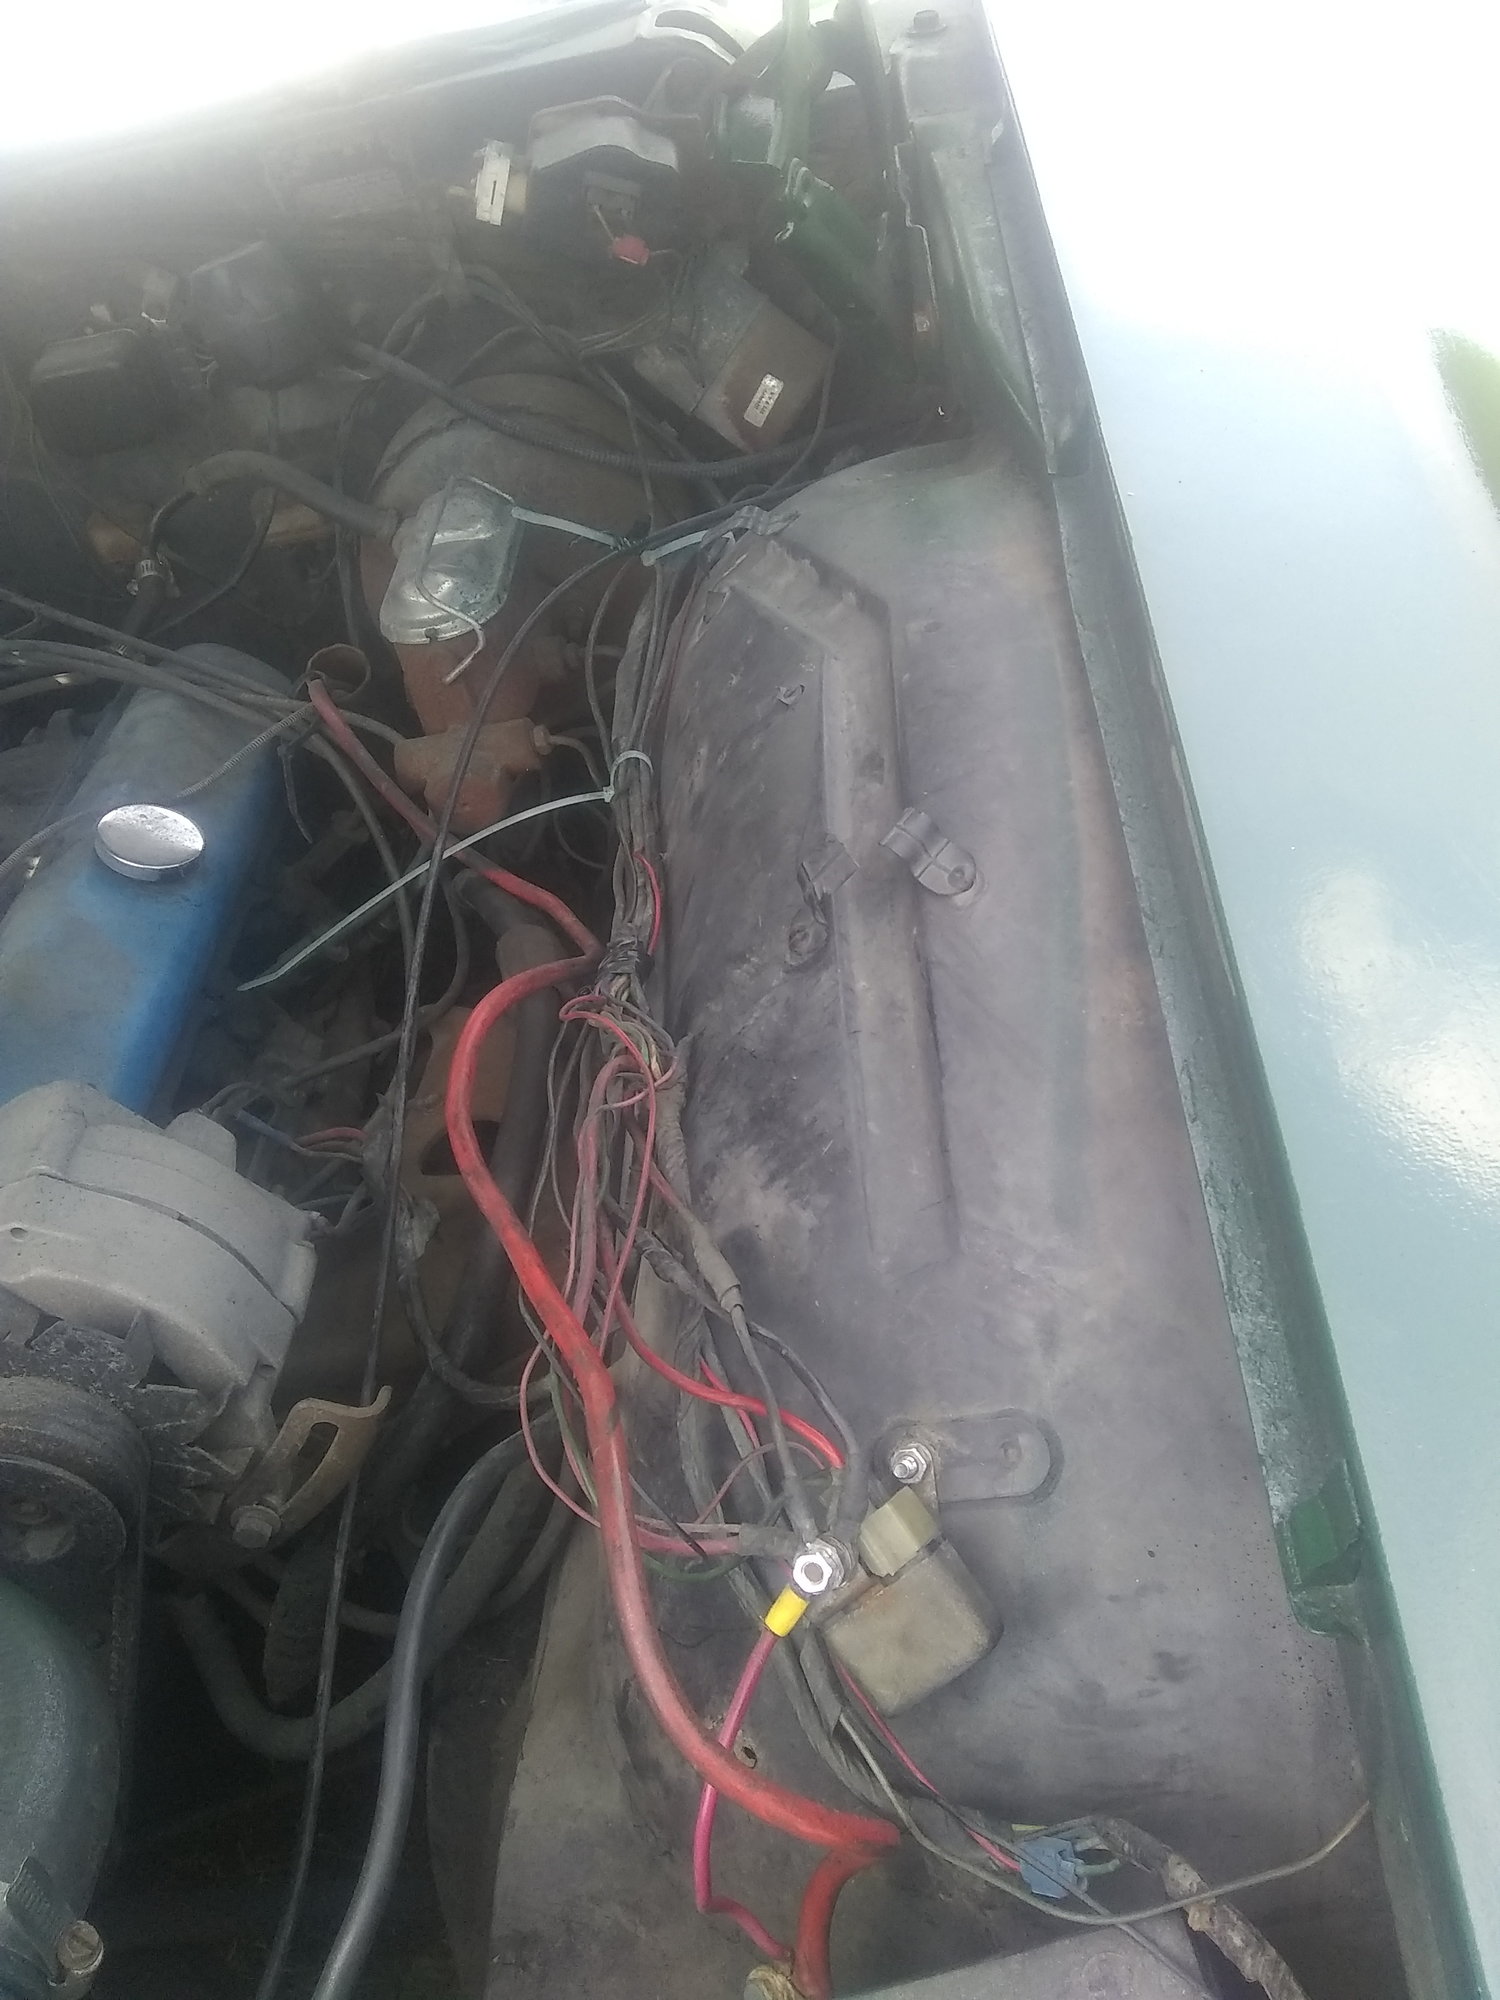 Excessive spark when connecting battery cables - ClassicOldsmobile.com Why Does My Battery Spark When I Connect It